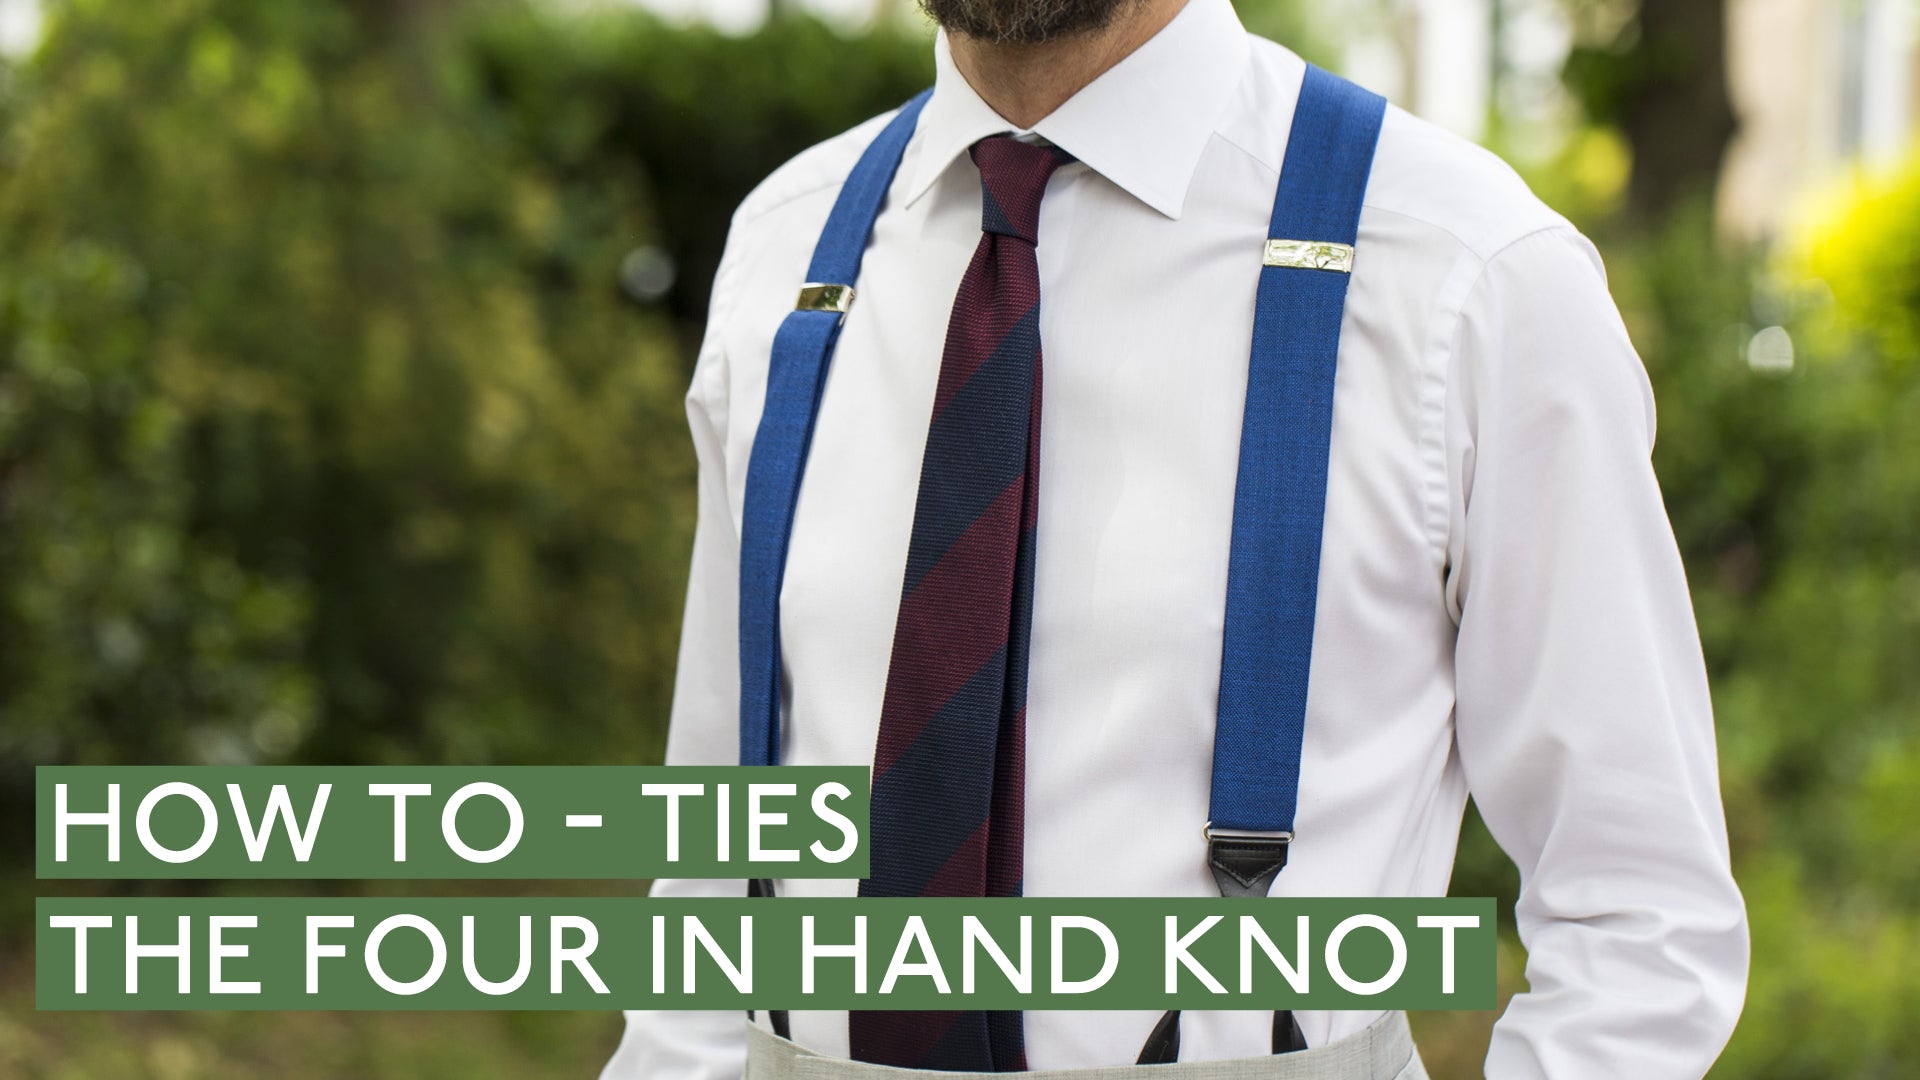 How To - Ties: The Four In Hand Knot